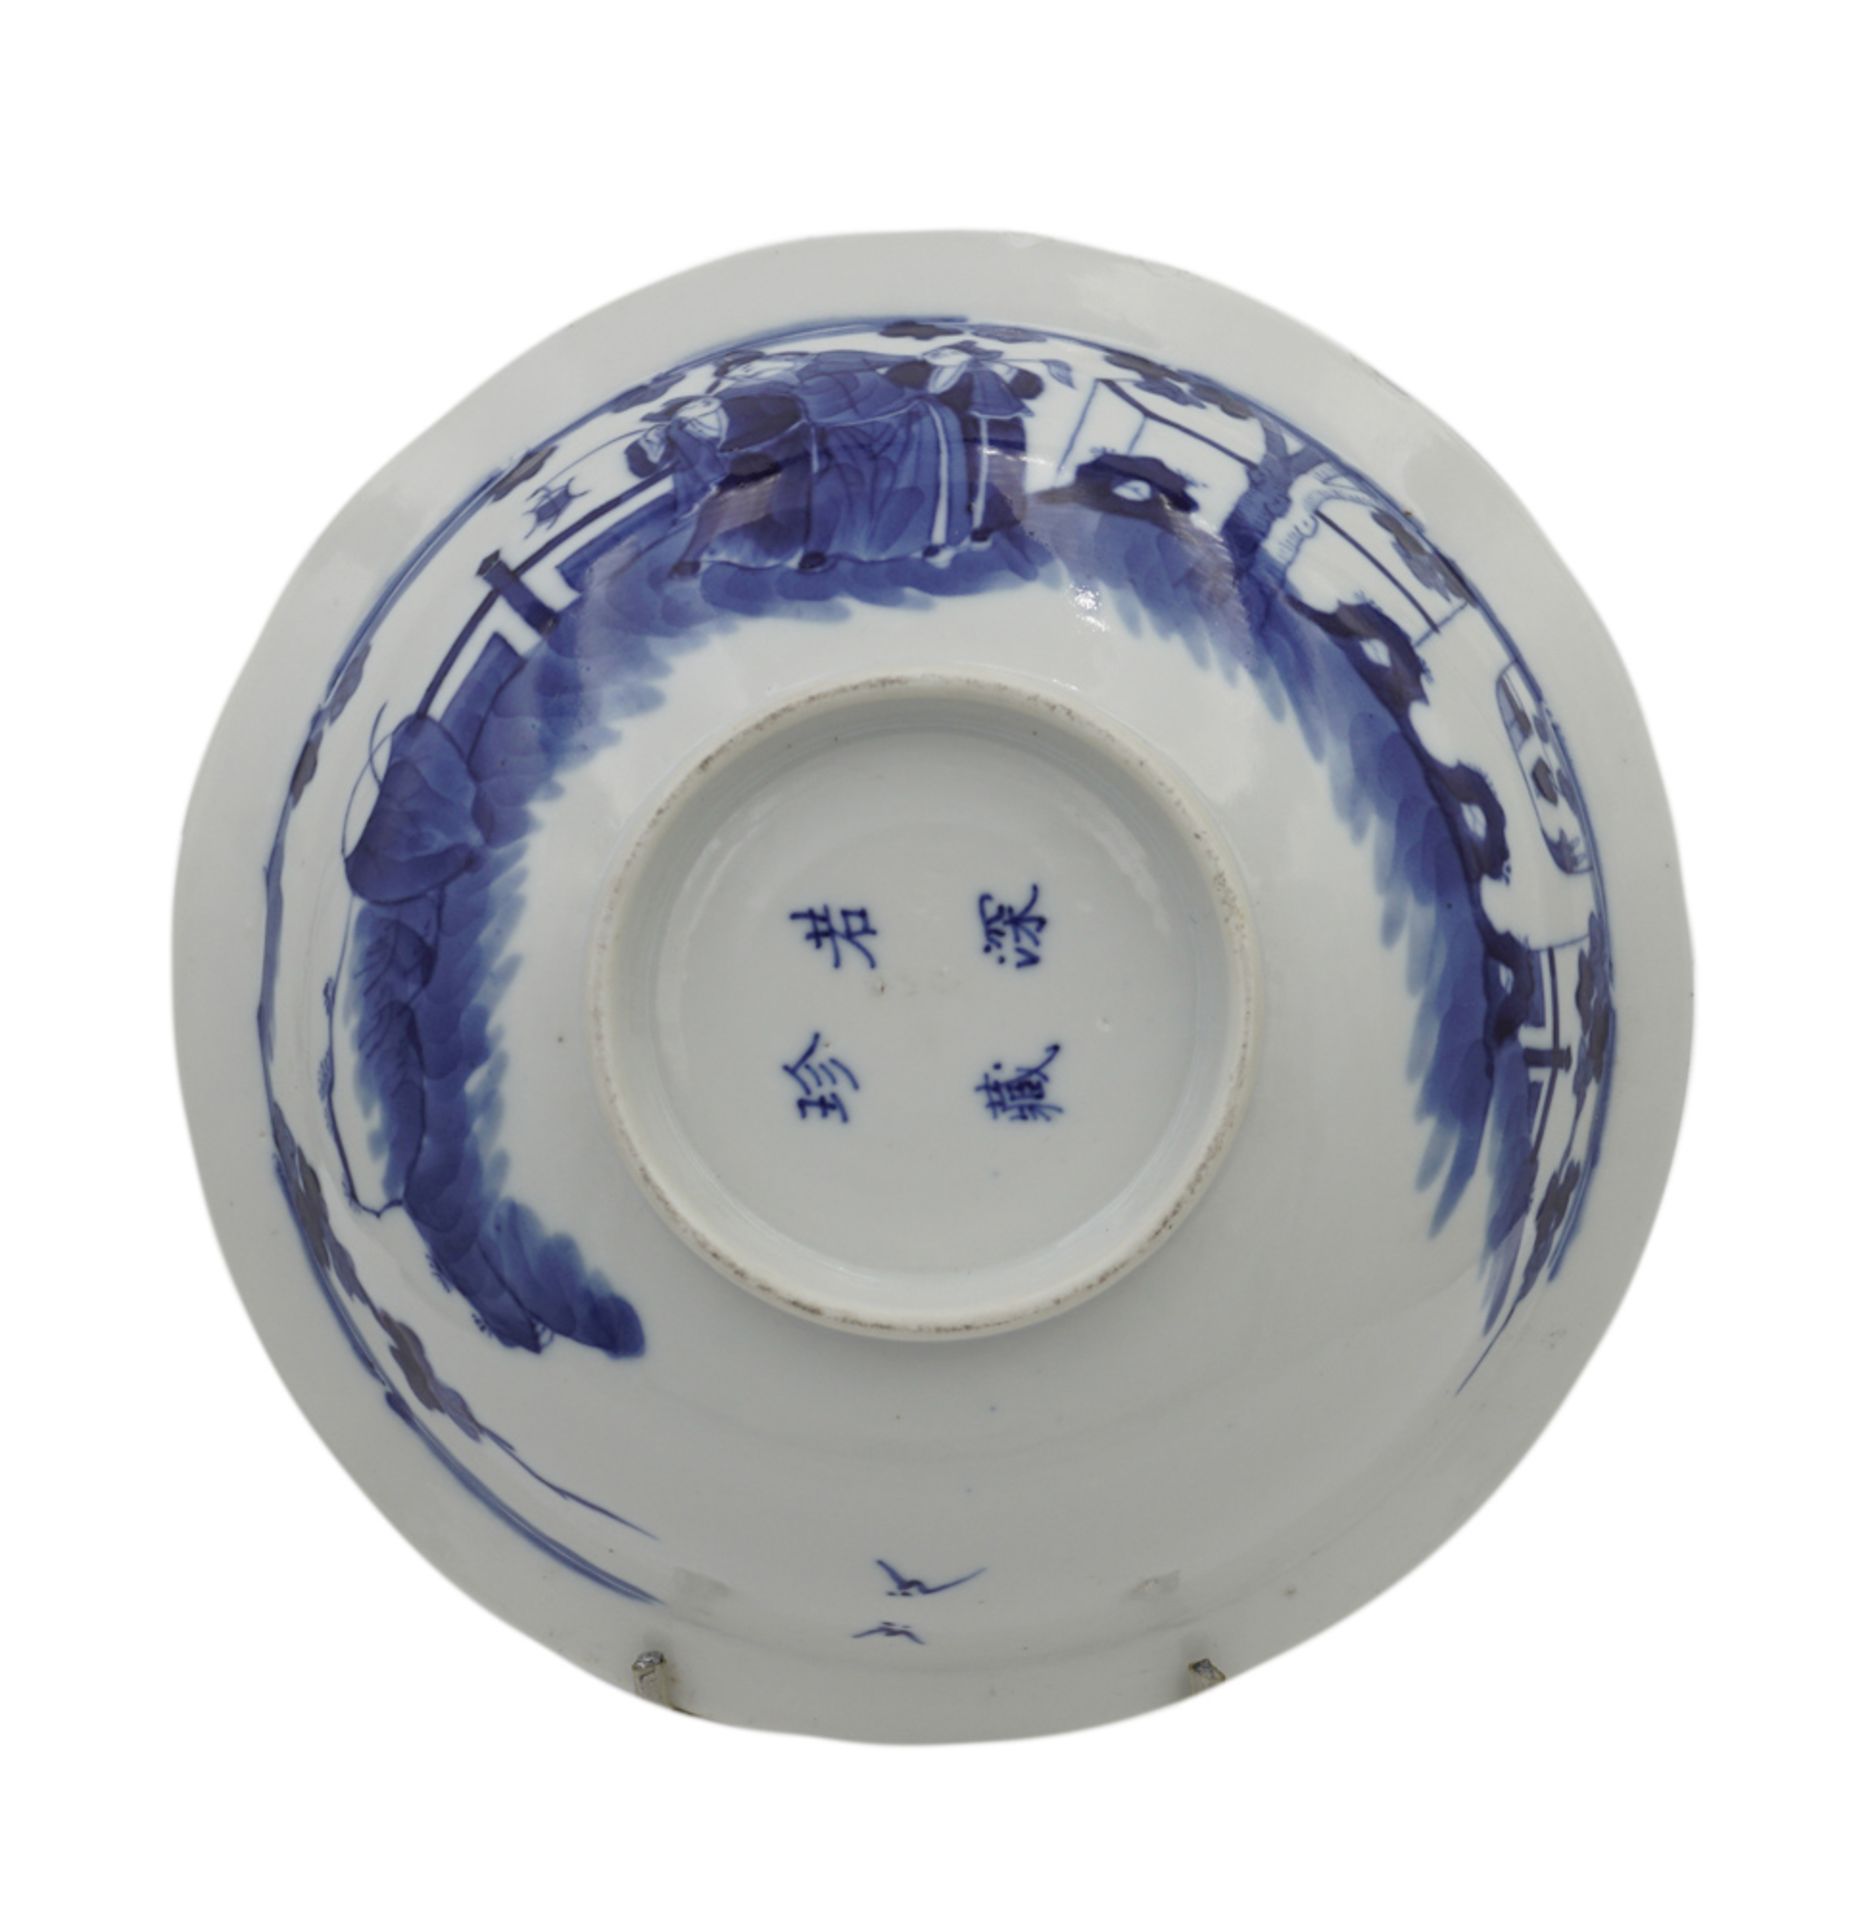 White and blue porcelain bowl China, 19th-20th century 6x19 cm. - Image 2 of 2